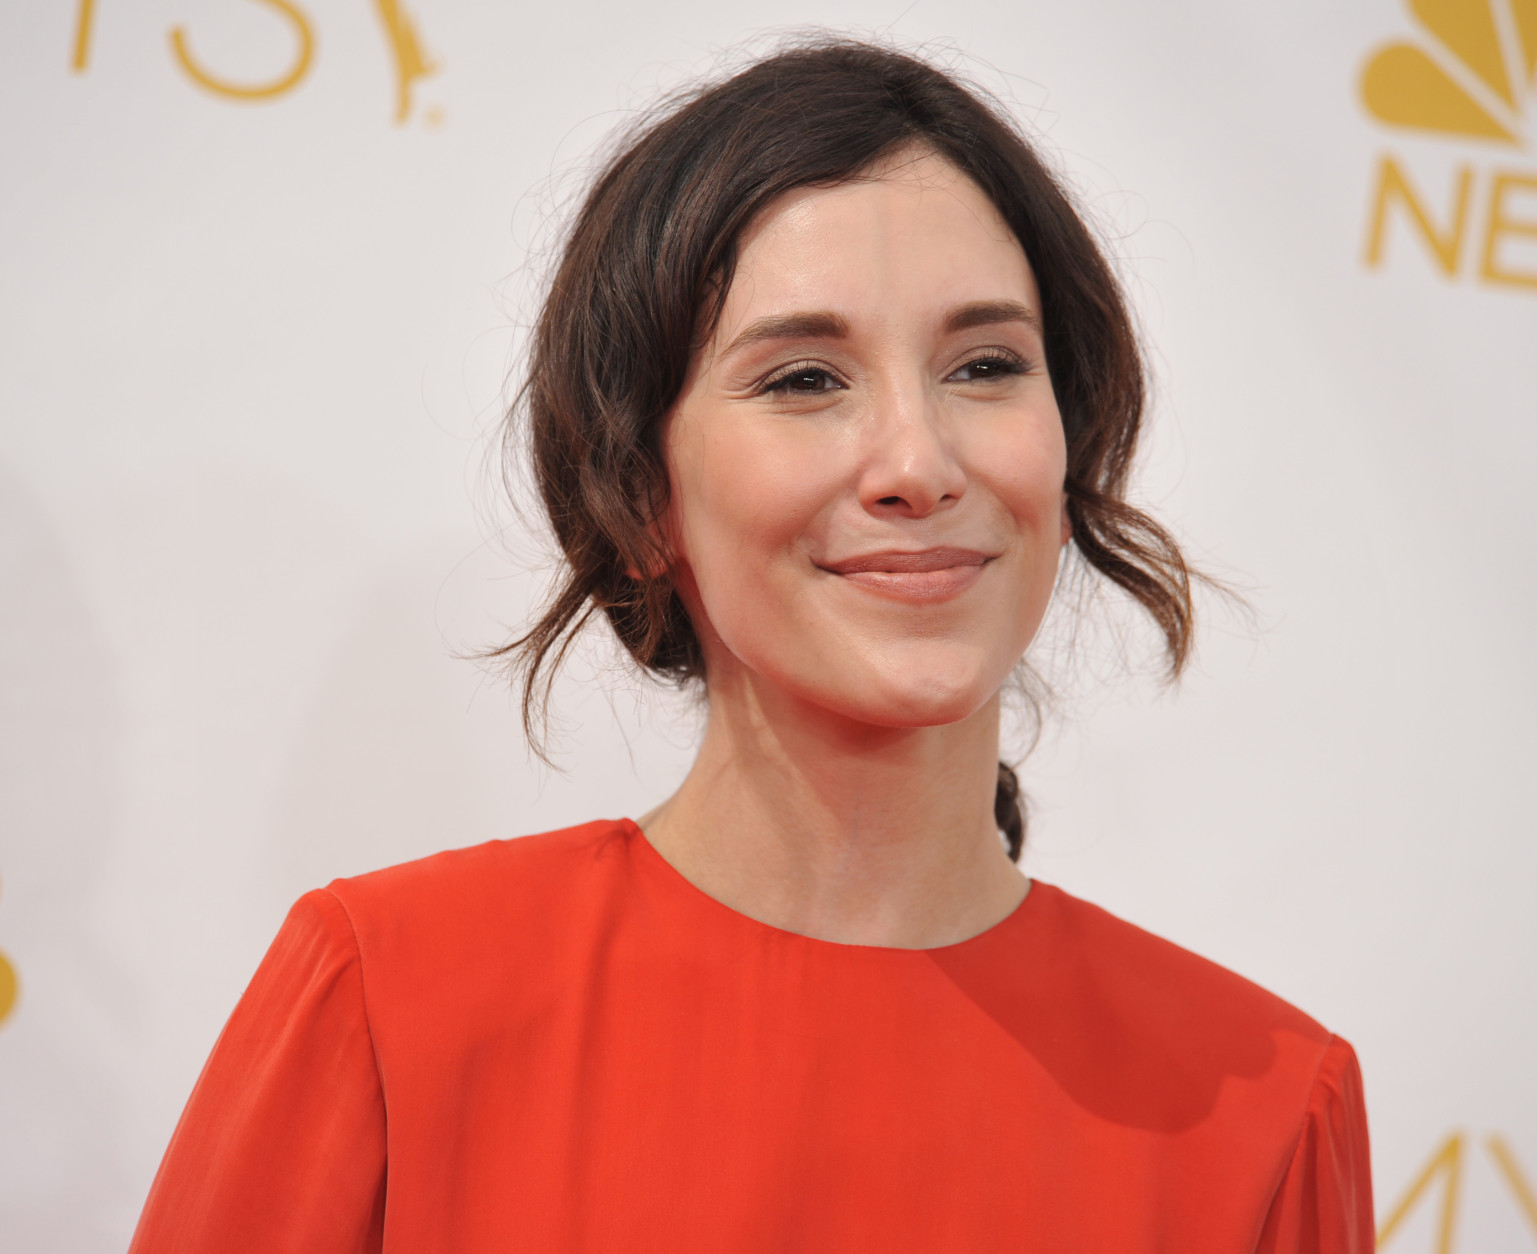 Sibel Kekilli arrives at the 66th Annual Primetime Emmy Awards at the Nokia Theatre L.A. Live on Monday, Aug. 25, 2014, in Los Angeles. (Photo by Richard Shotwell/Invision/AP)